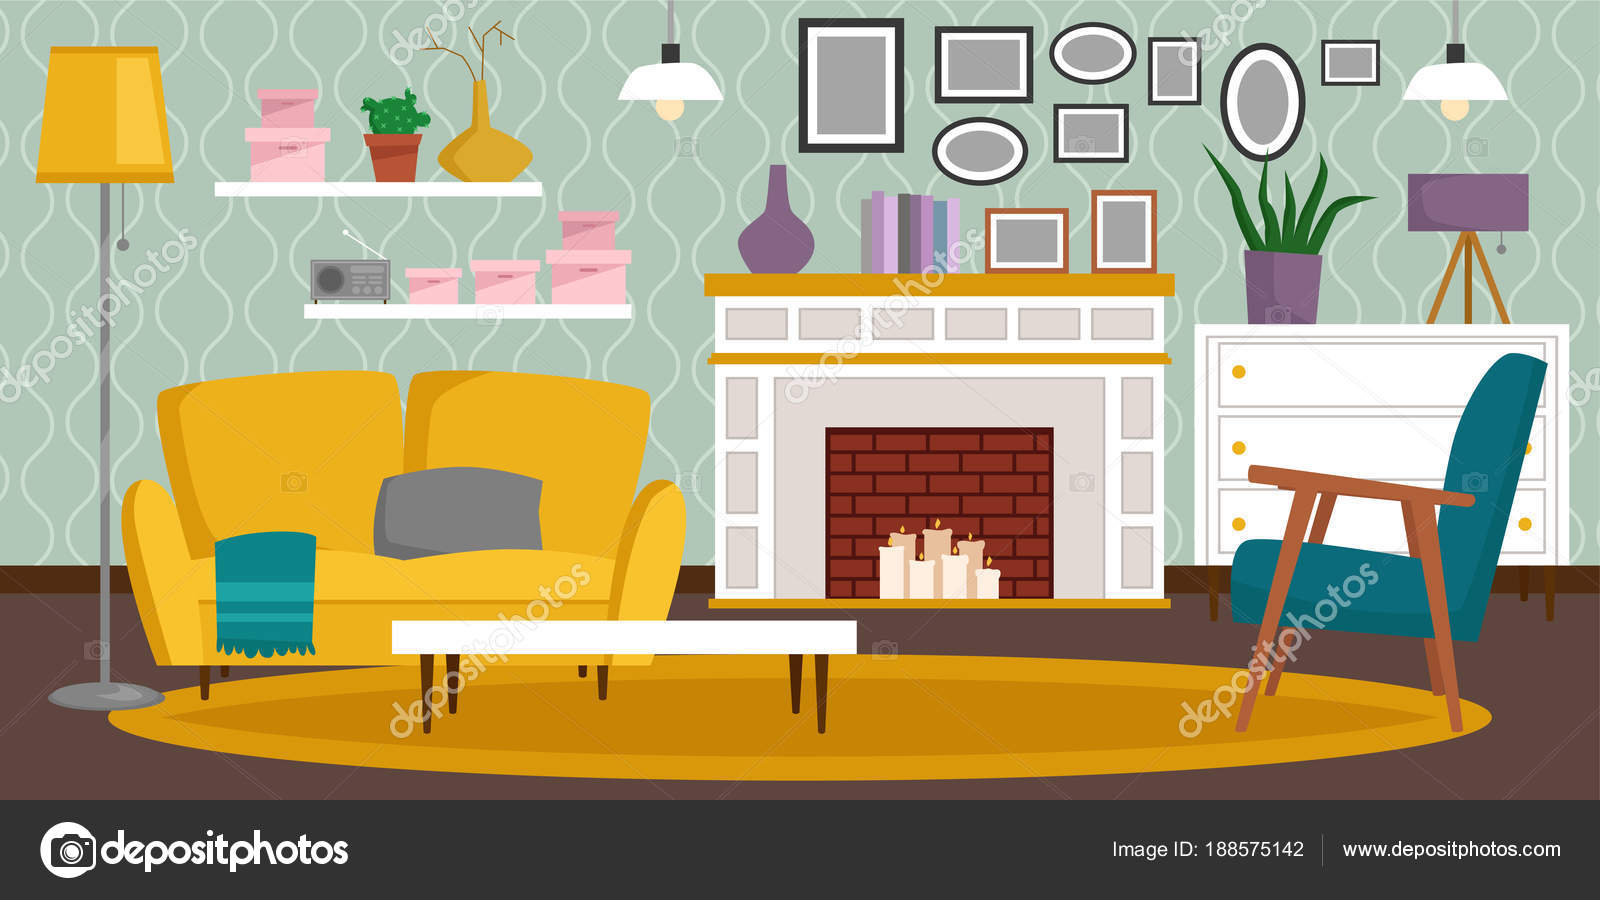 Wealthy house Vector Art Stock Images | Depositphotos